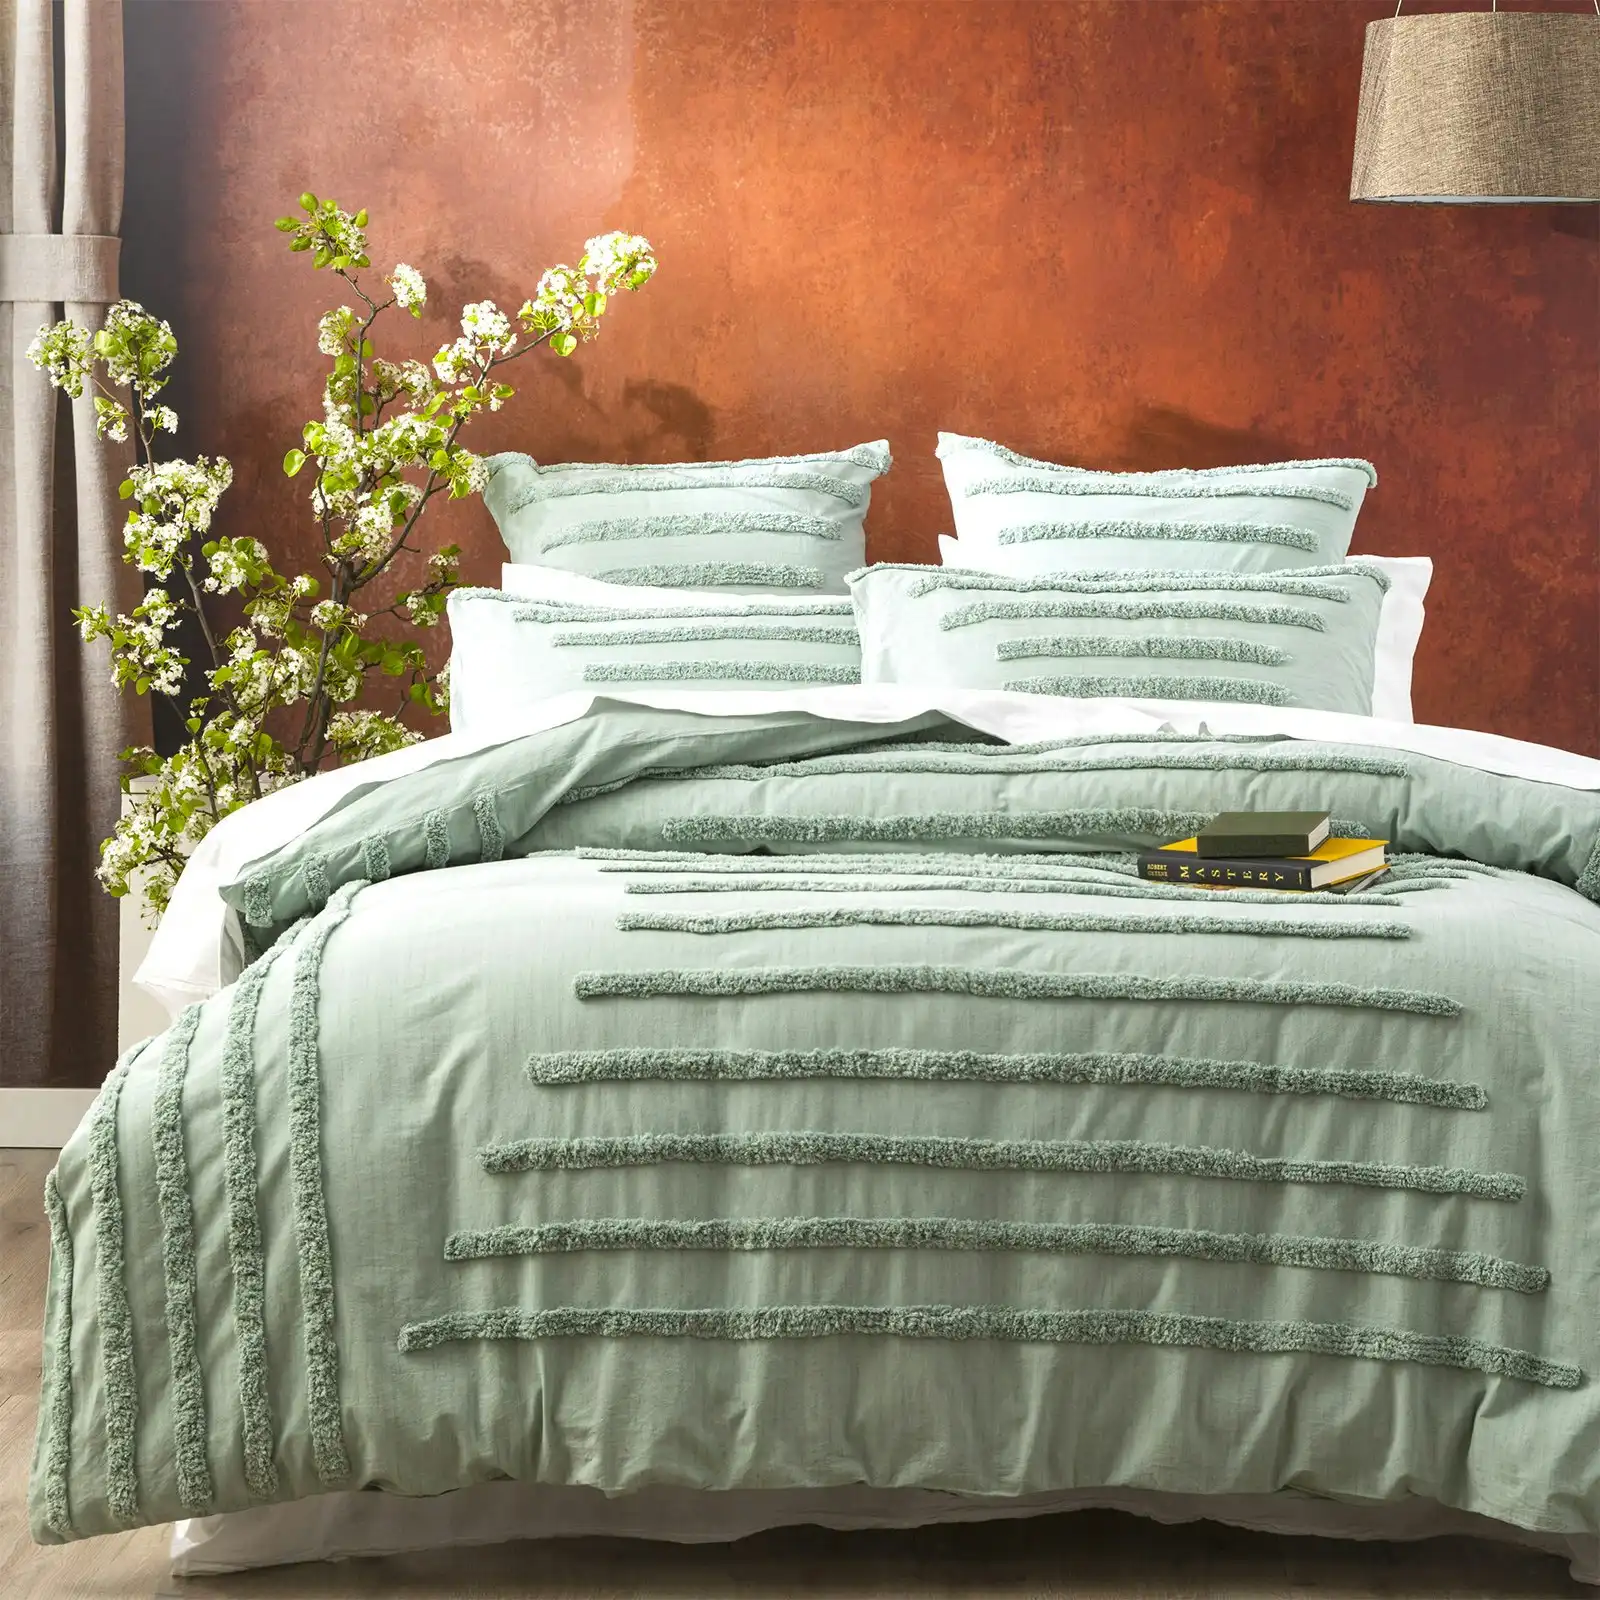 Renee Taylor Classic Super King Bed Quilt Cover Cotton VINT Washed Tufted Sage